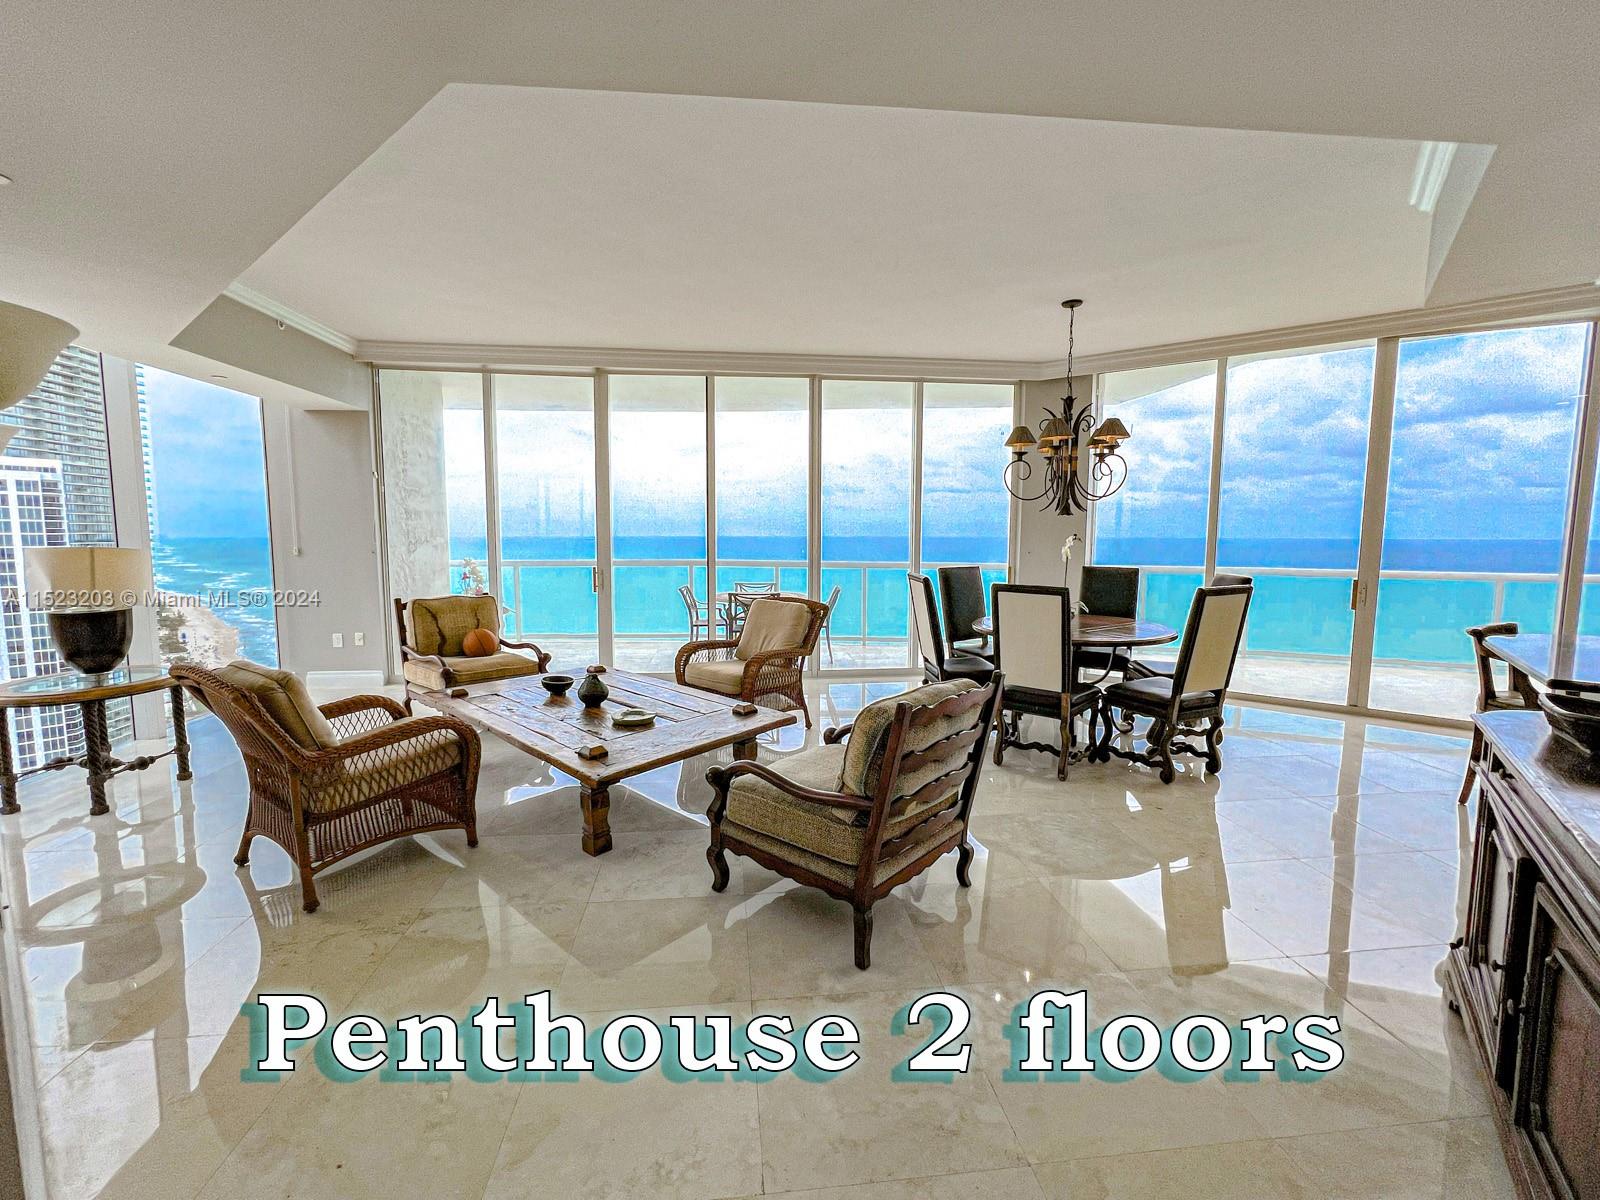 The price DROPPED considerably to rent fast! Luxury awaits in this 4-bed, 4 1/2 -bath PENTHOUSE with a sprawling outdoor oasis. Enjoy panoramic ocean views from every room, while the expansive terrace beckons for serene moments. Elevate your lifestyle in this haven of elegance. As if that weren't enough, to add to this magnificent Penthouse, you also have exclusive rights to a pool cabana in front of the pool and just a few steps from the beach.  Parking spaces? You have three just for you!  Act fast to secure this Ocean front gem. Super easy to show!